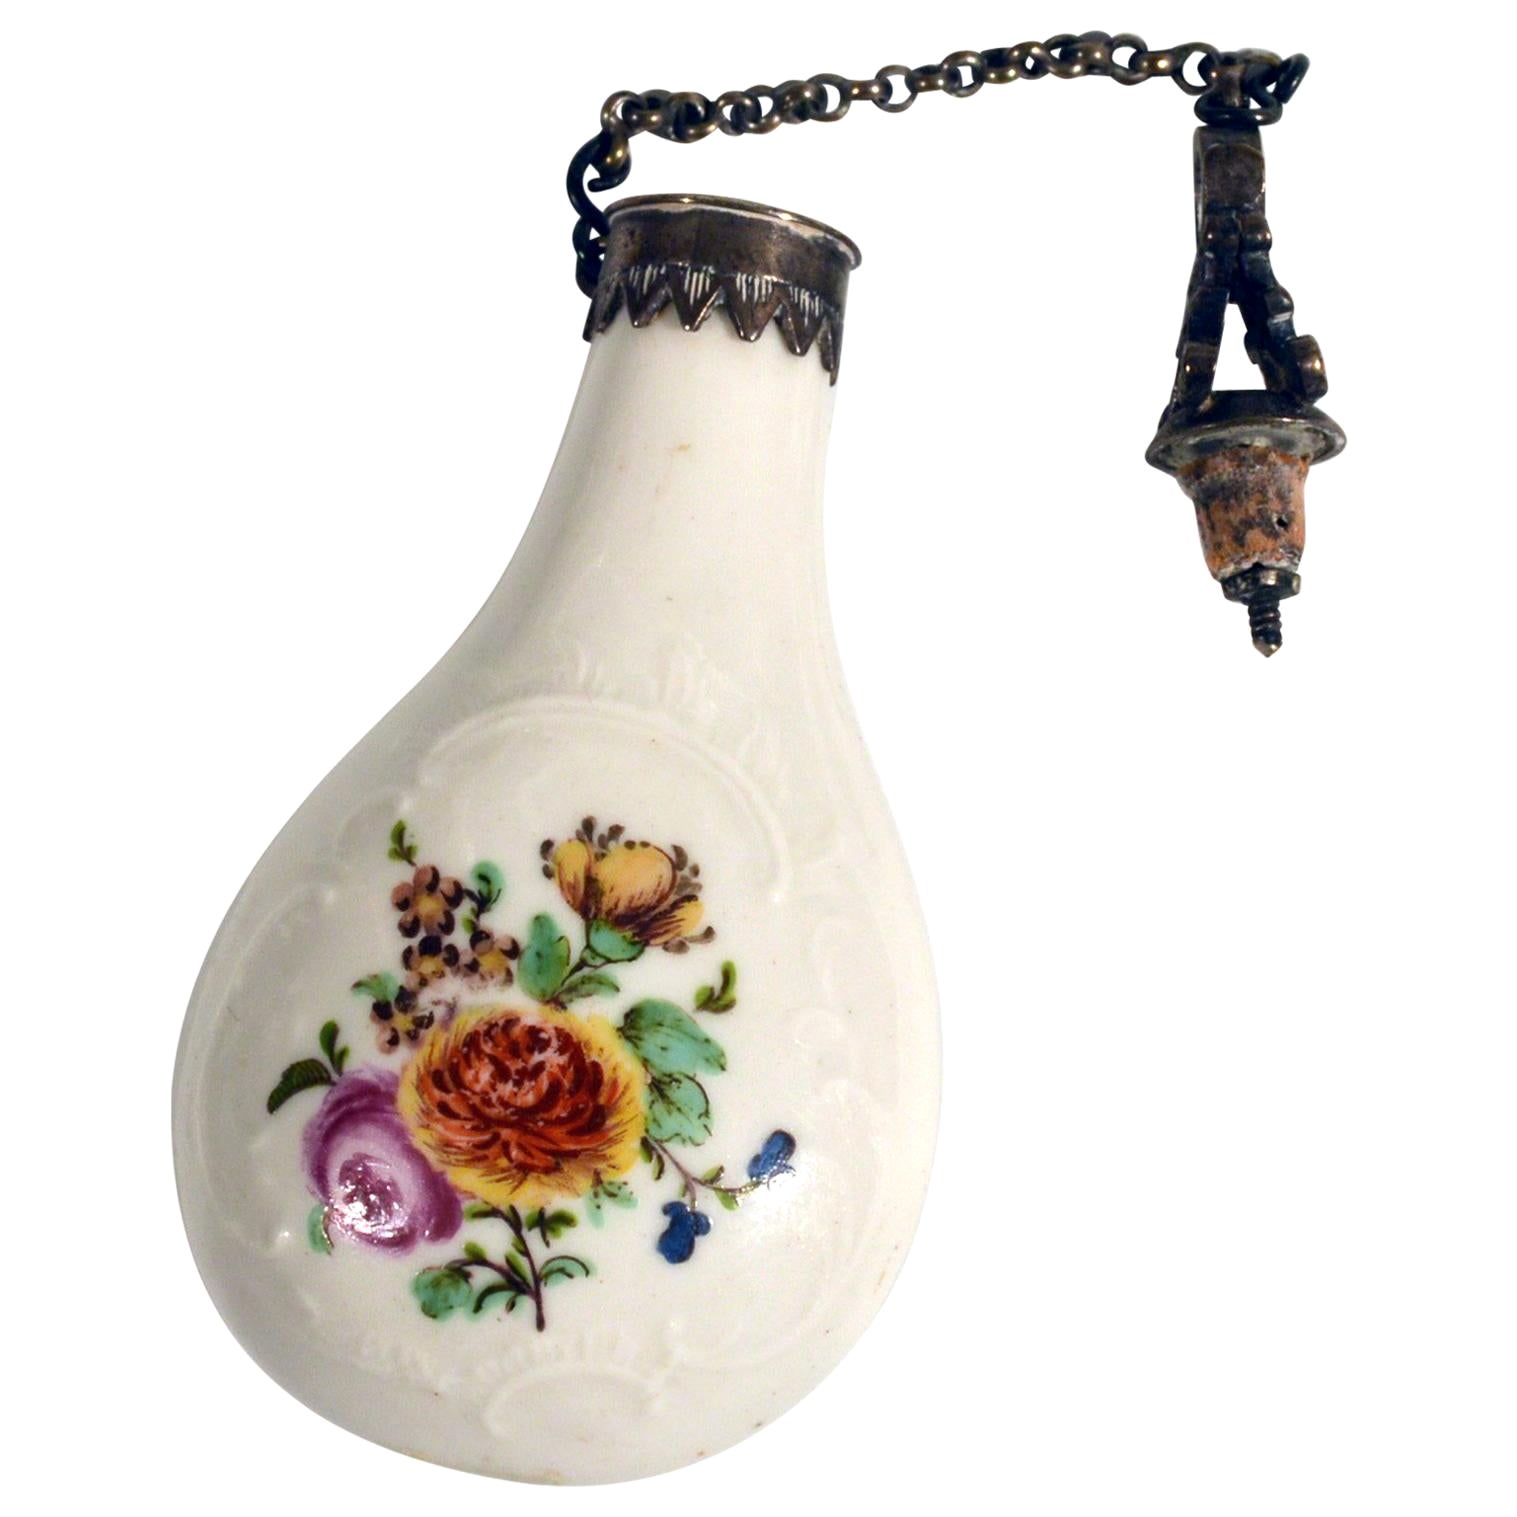 French Porcelain Perfume Bottle with Bouquets of Flowers, circa 1775